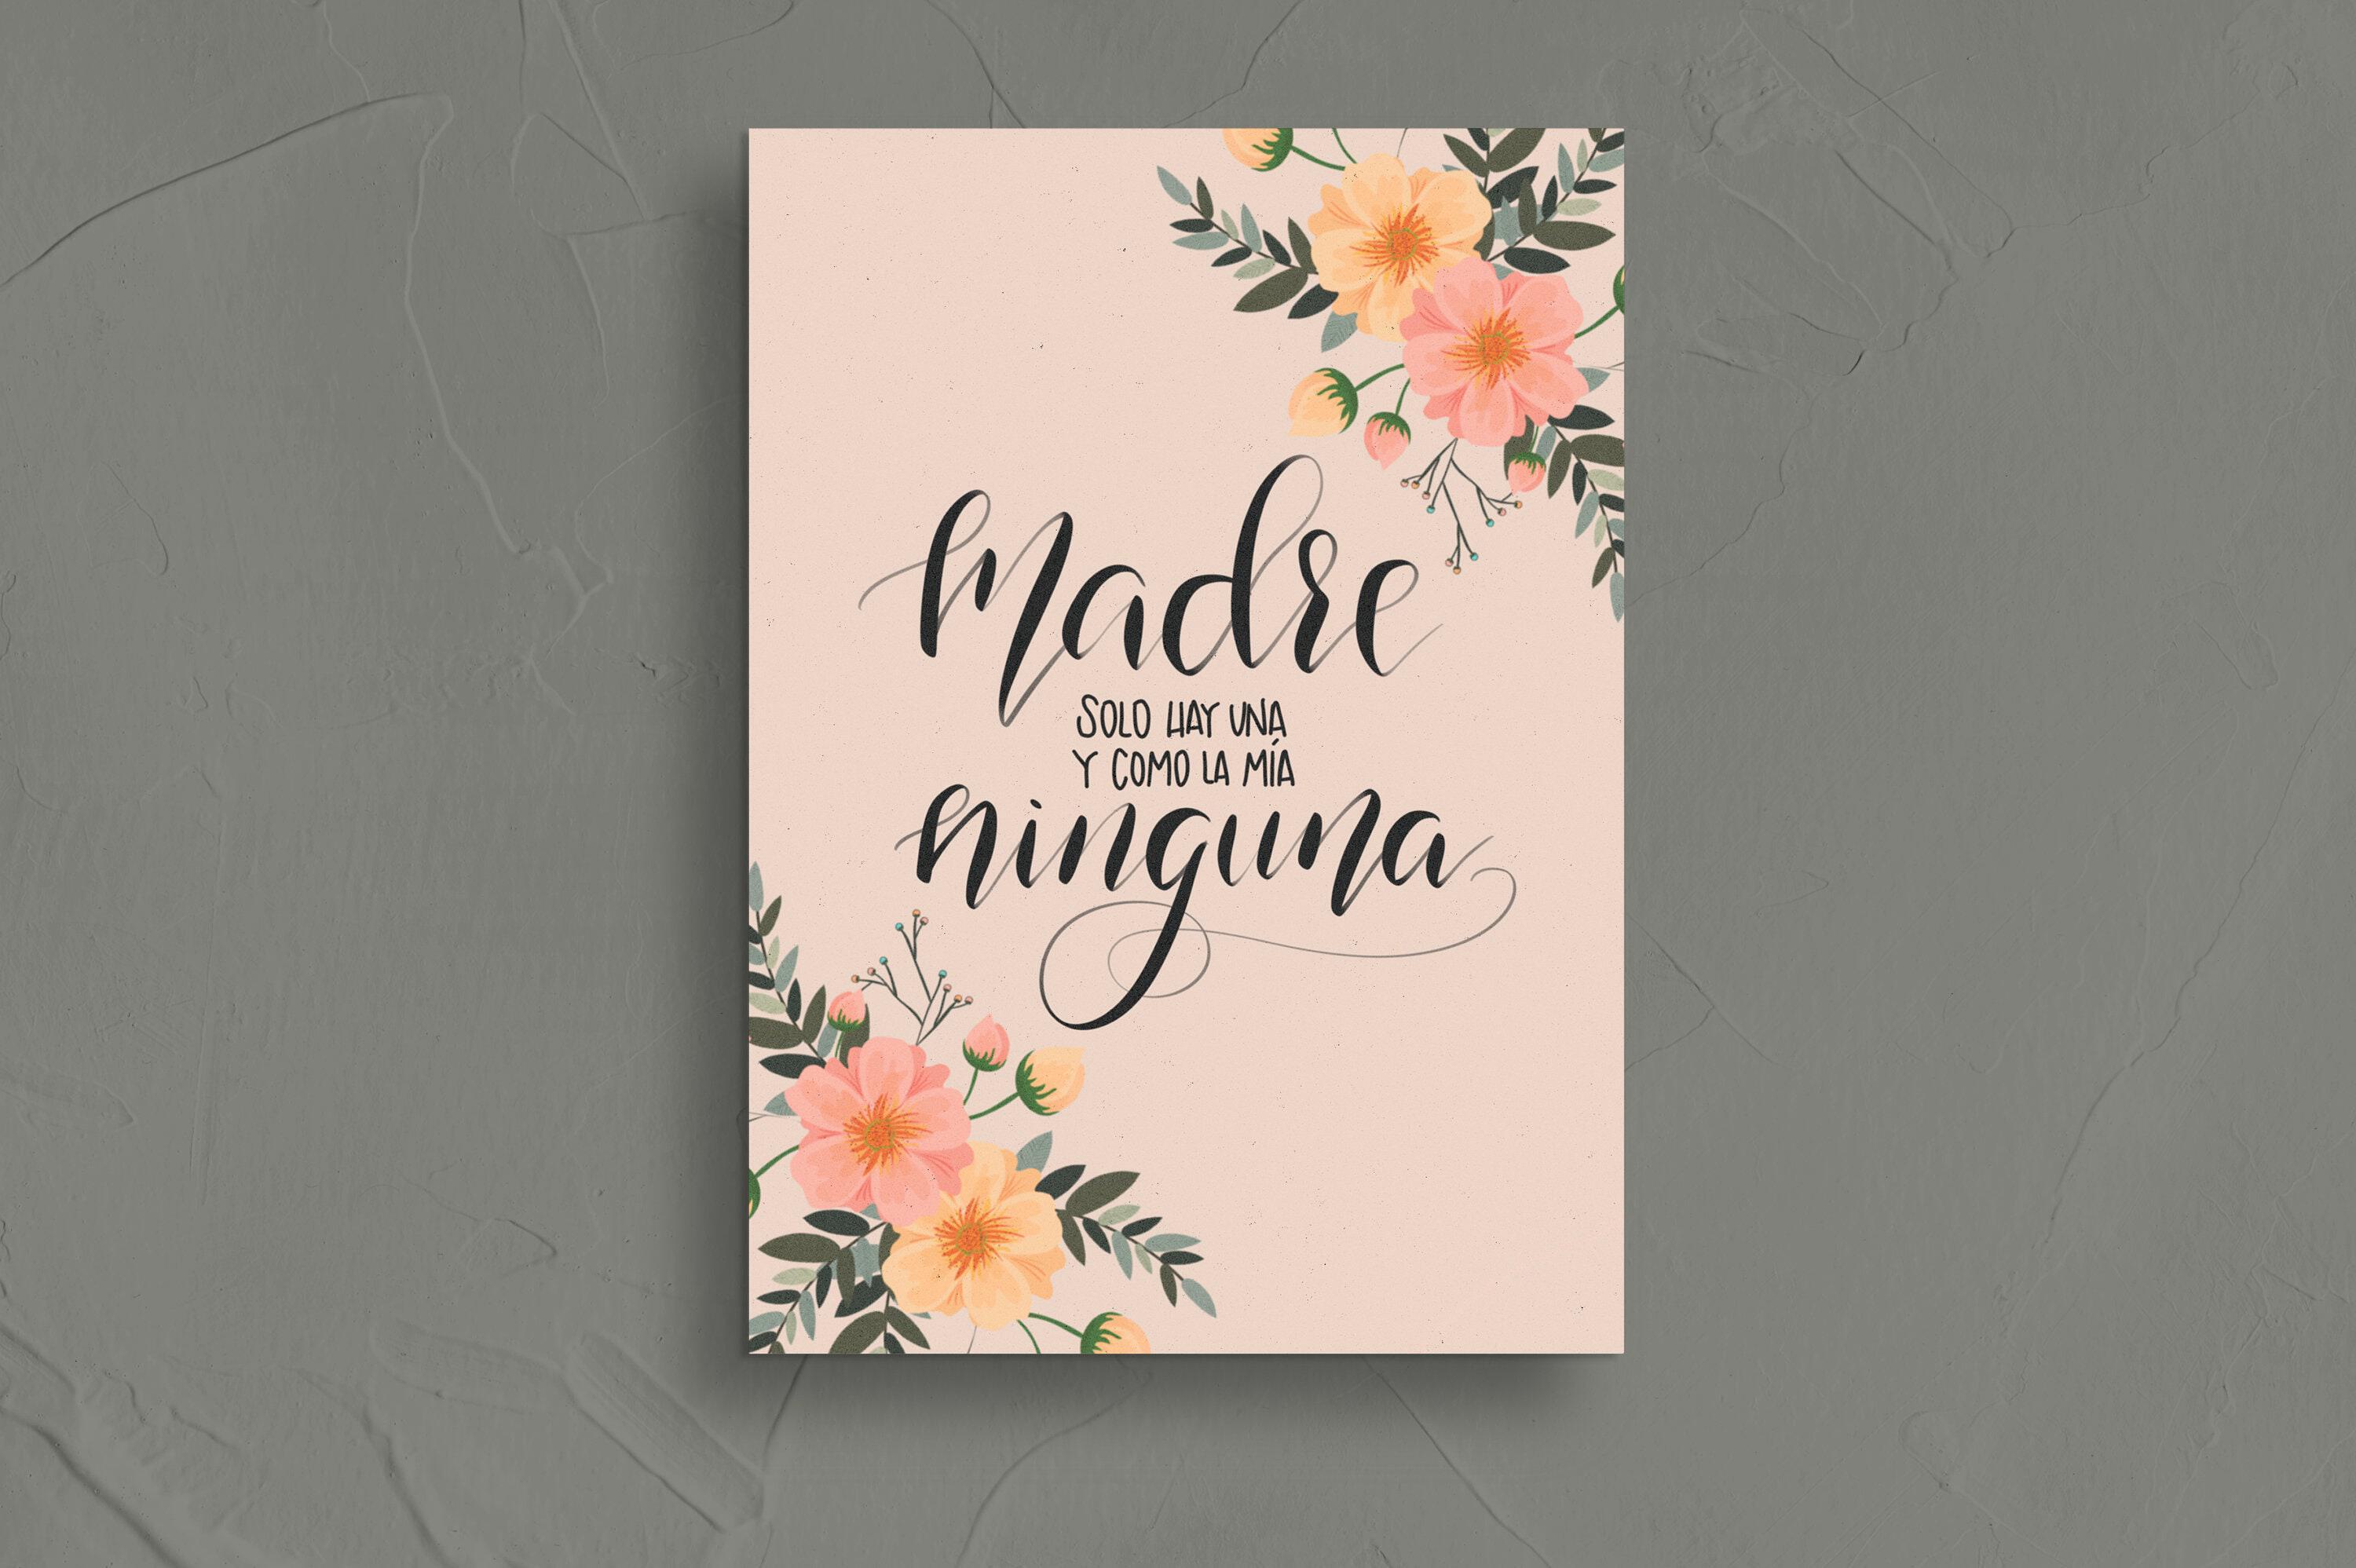 Products :: Madre Solo Hay Una, Mother's Day Card in Spanish, Mother's Day  Gifts, Spanish Mom Birthday Card, Dia de las Madres, Spanish Mother's Day